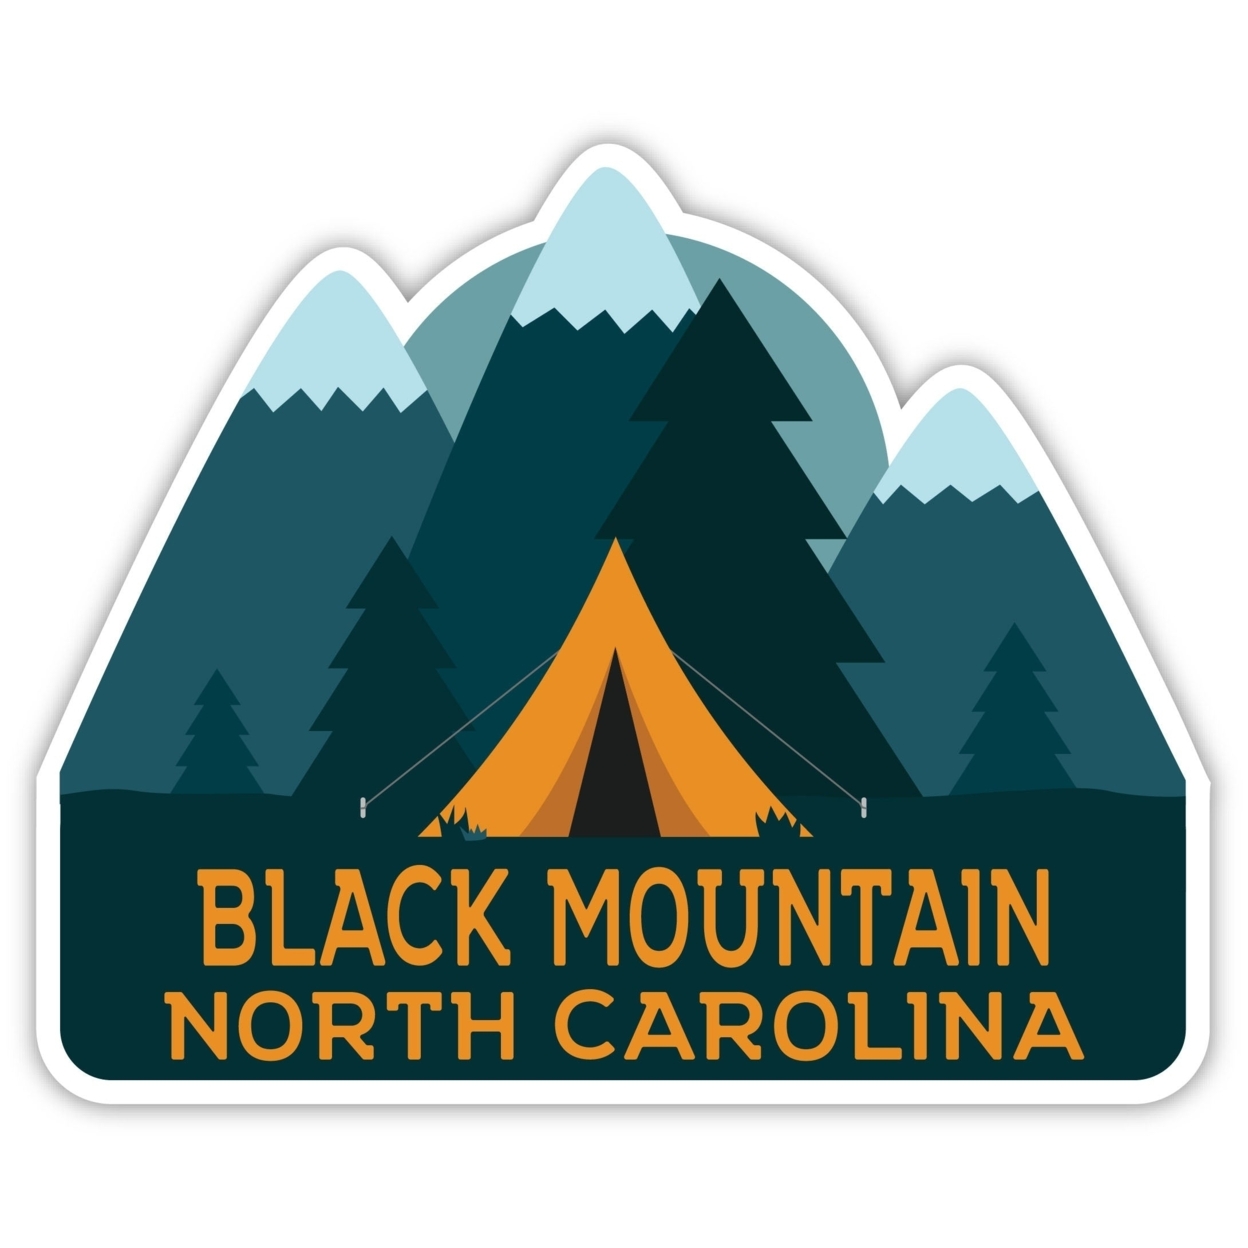 Black Mountain North Carolina Souvenir Decorative Stickers (Choose Theme And Size) - 4-Pack, 10-Inch, Tent